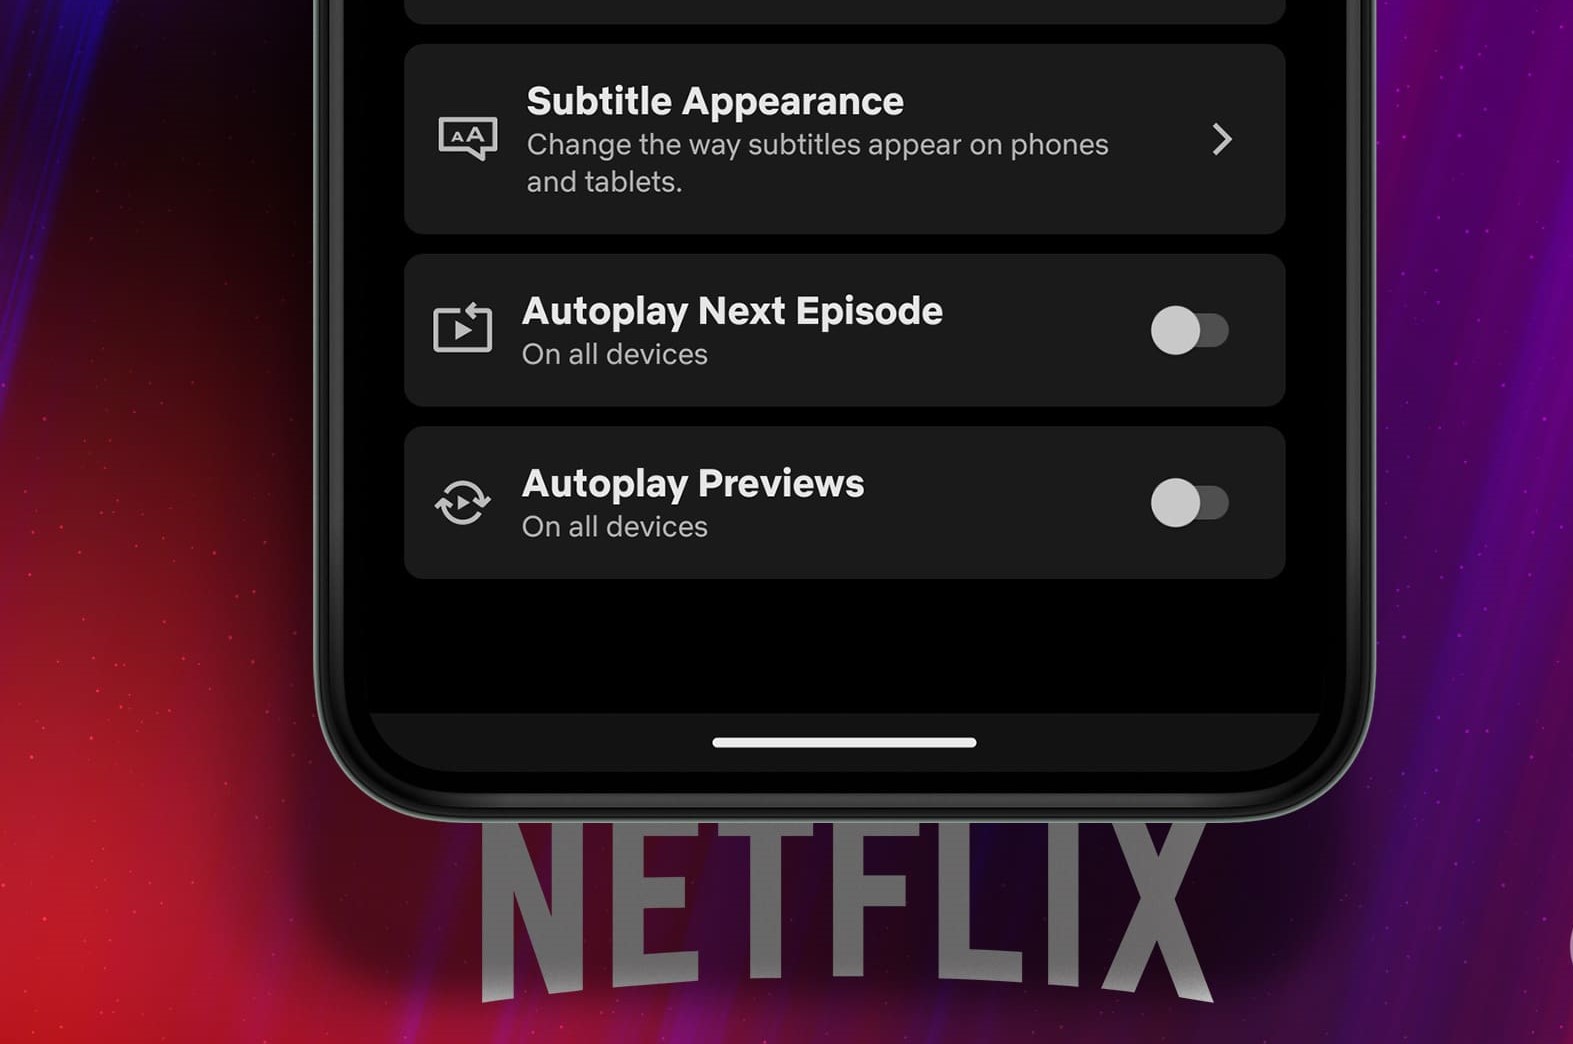 How To Turn Off Netflix Autoplay Previews And Next Episode